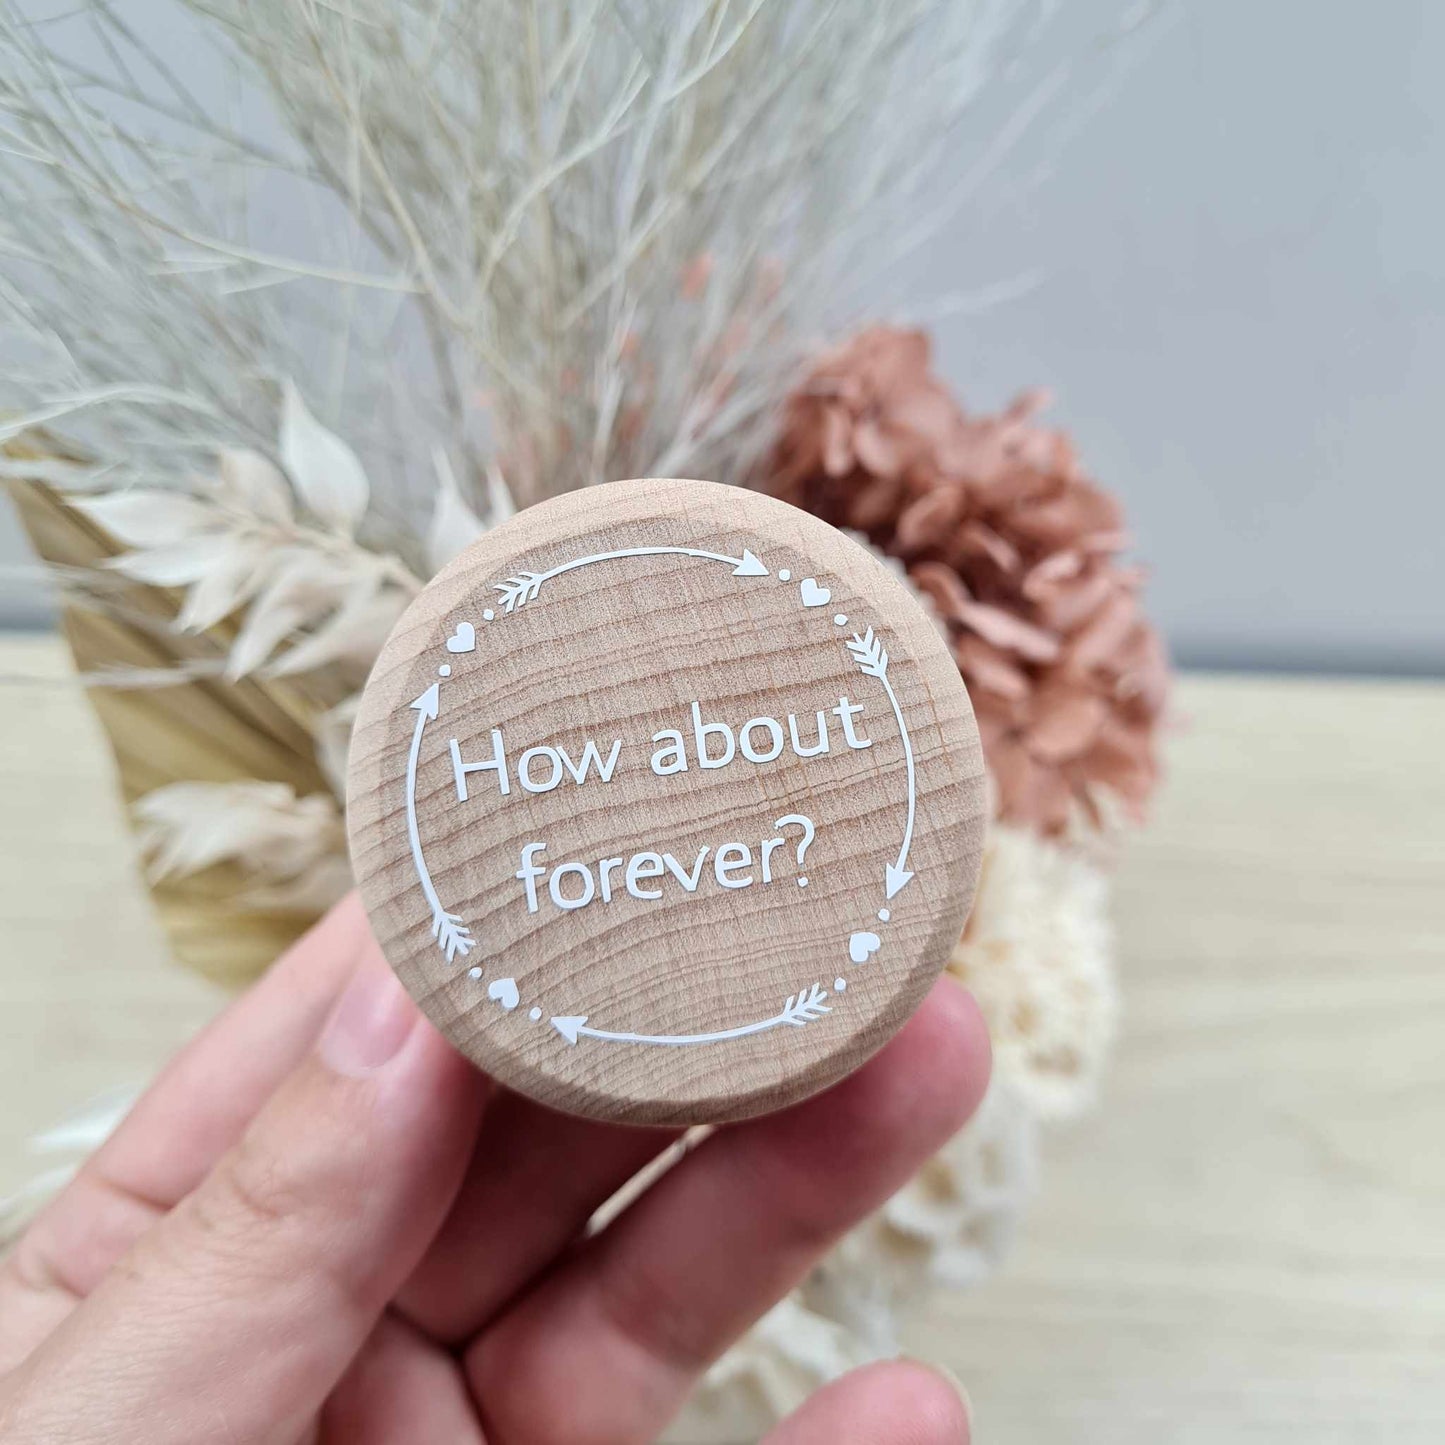 How About Forever? Ring Box